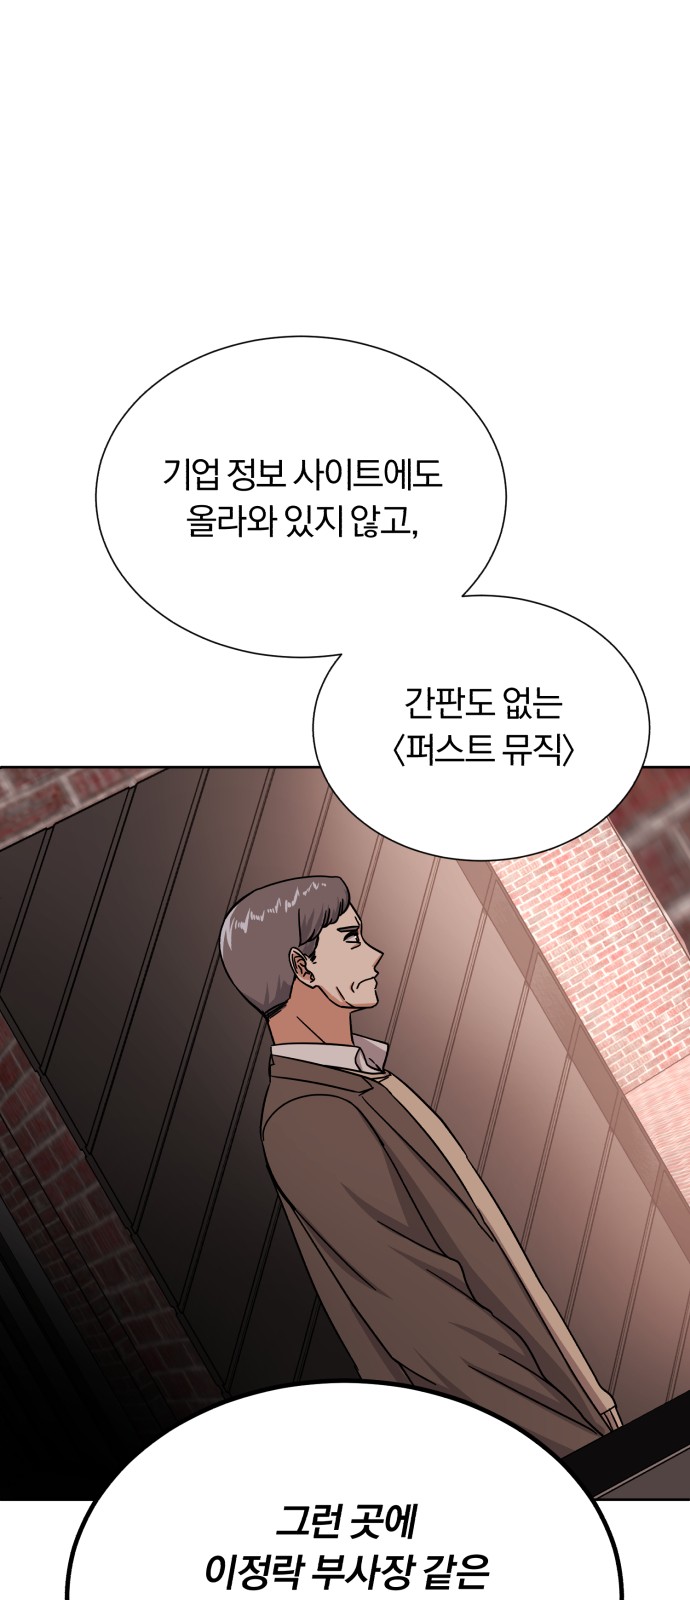 Superstar Cheon Dae-ri - Chapter 42 - Page 1